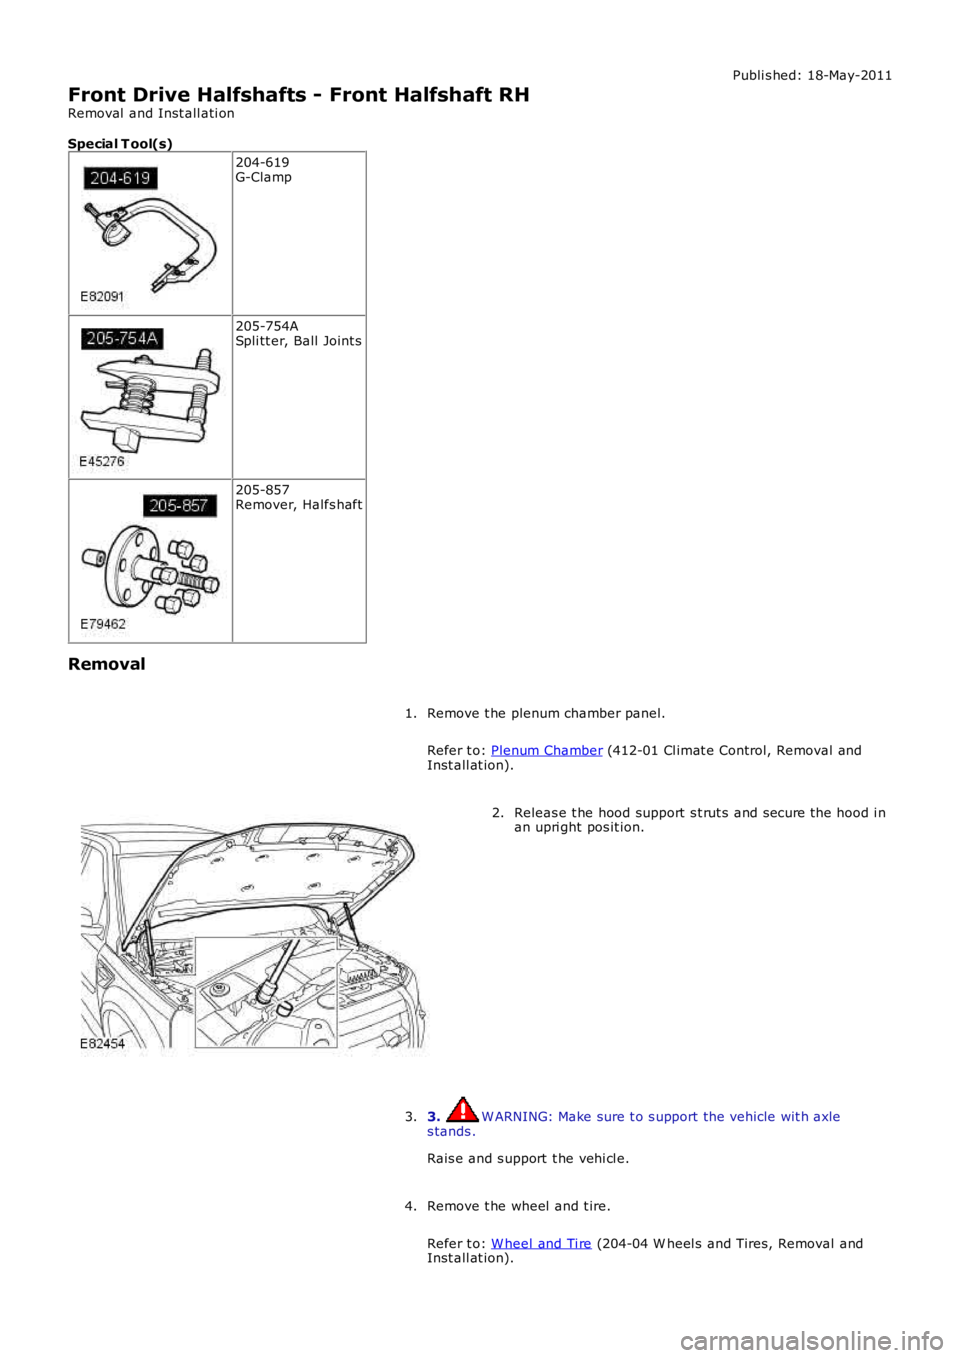 LAND ROVER FRELANDER 2 2006 Workshop Manual Publi s hed: 18-May-2011
Front Drive Halfshafts - Front Halfshaft RH
Removal  and Inst all ati on
Special T ool(s) 204-619
G-Clamp 205-754A
Spli tt er, Ball  Joint s 205-857
Remover, Halfs haft
Remova